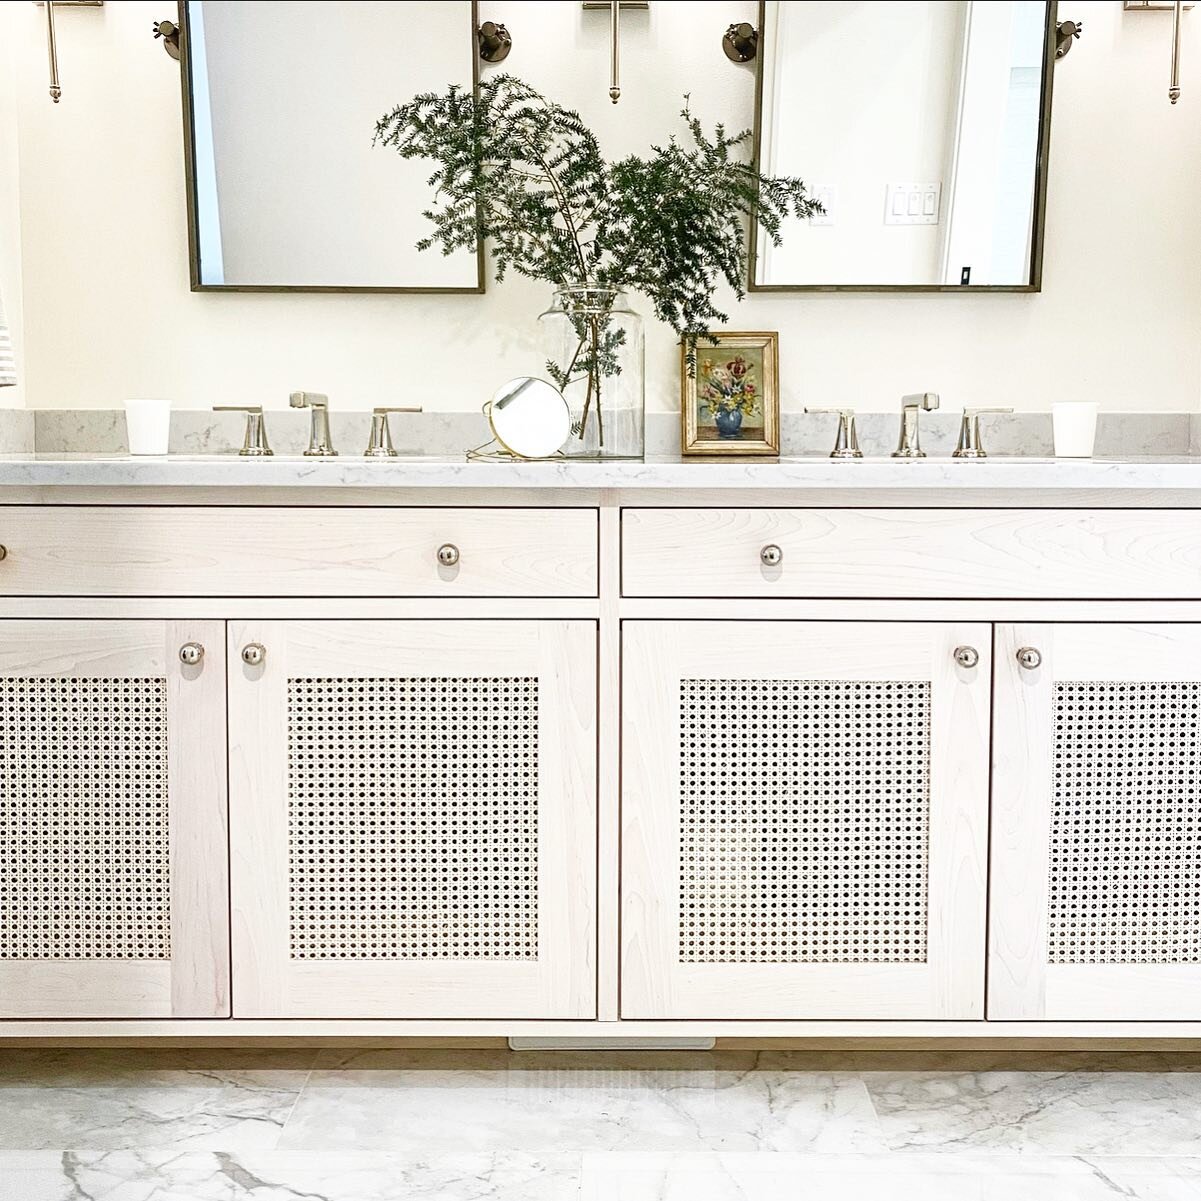 Custom cabinetry design is one of the best ways we create a unique space that suits the personality of the project + client.  This master en-suite vanity we designed uses textures, finishes and wood species that (we can say) worked harmoniously toget